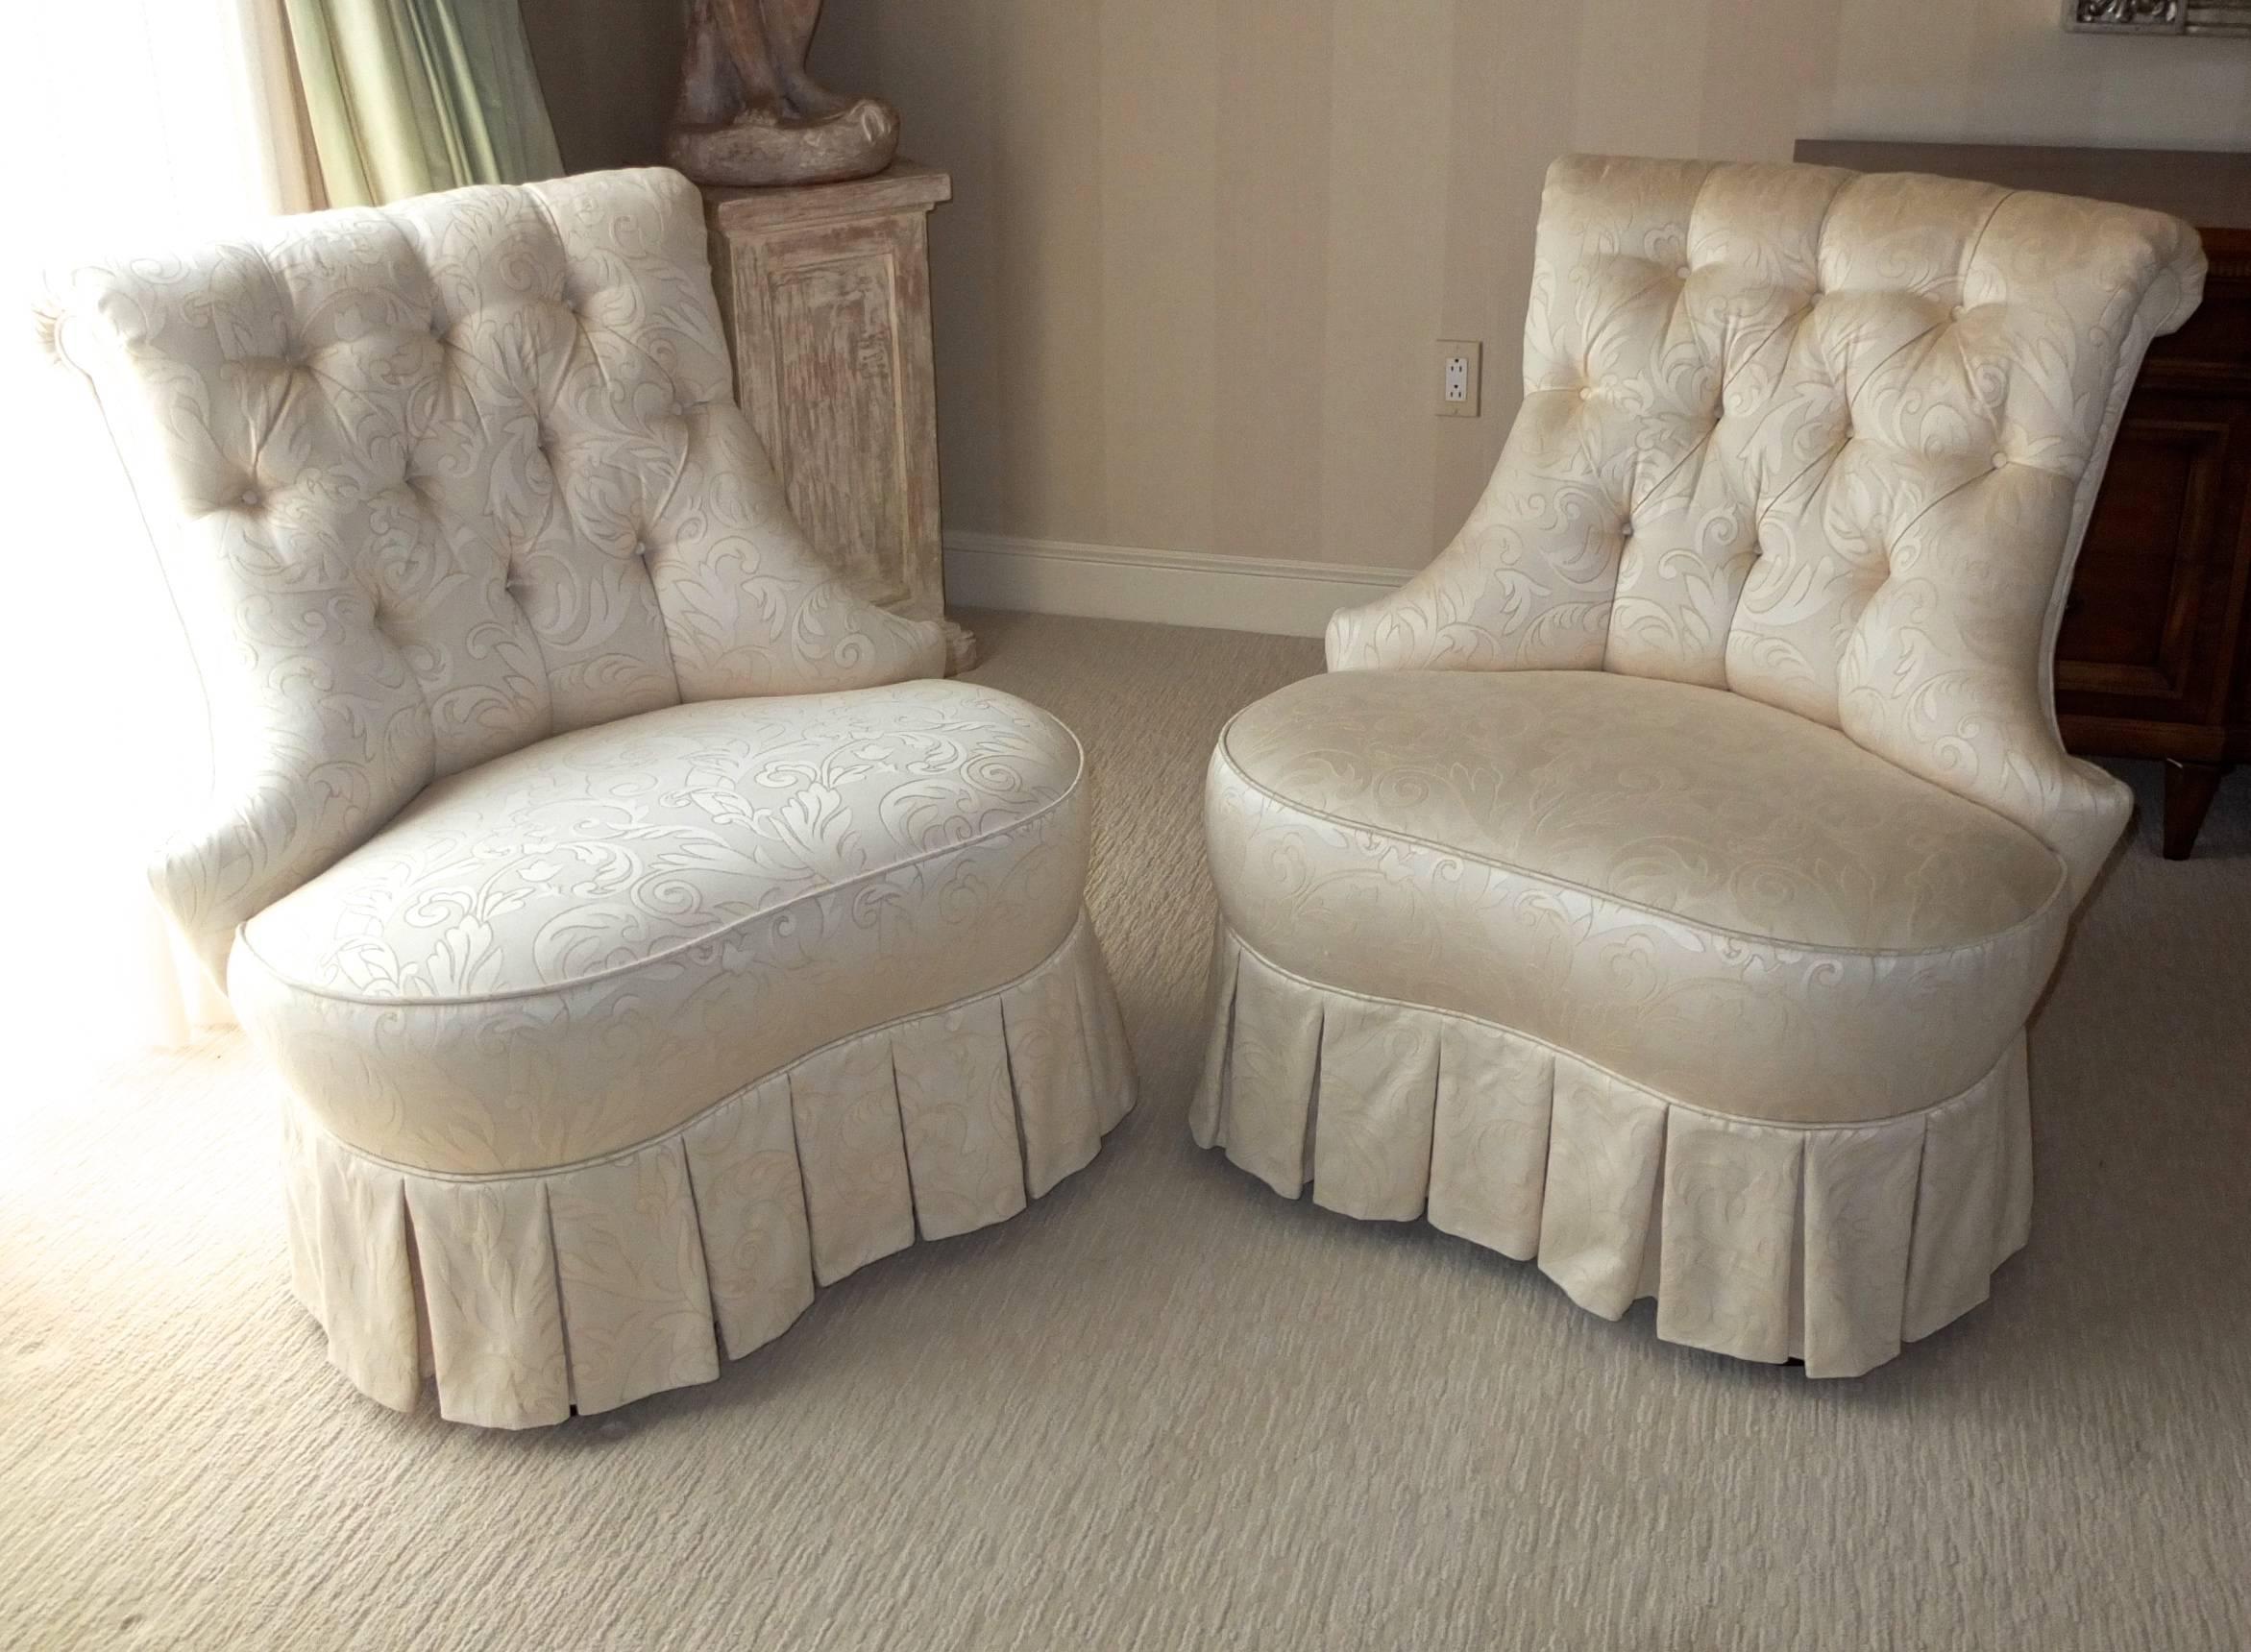 Pair of custom Karges spring seat crescent shaped slipper chairs. Hand diamand tufted backs with self cover buttons and dressmaker skirt tailoring in ivory damask Brunschwig & Fils leaf pattern upholstery. Excellent condition. No stains or fading.